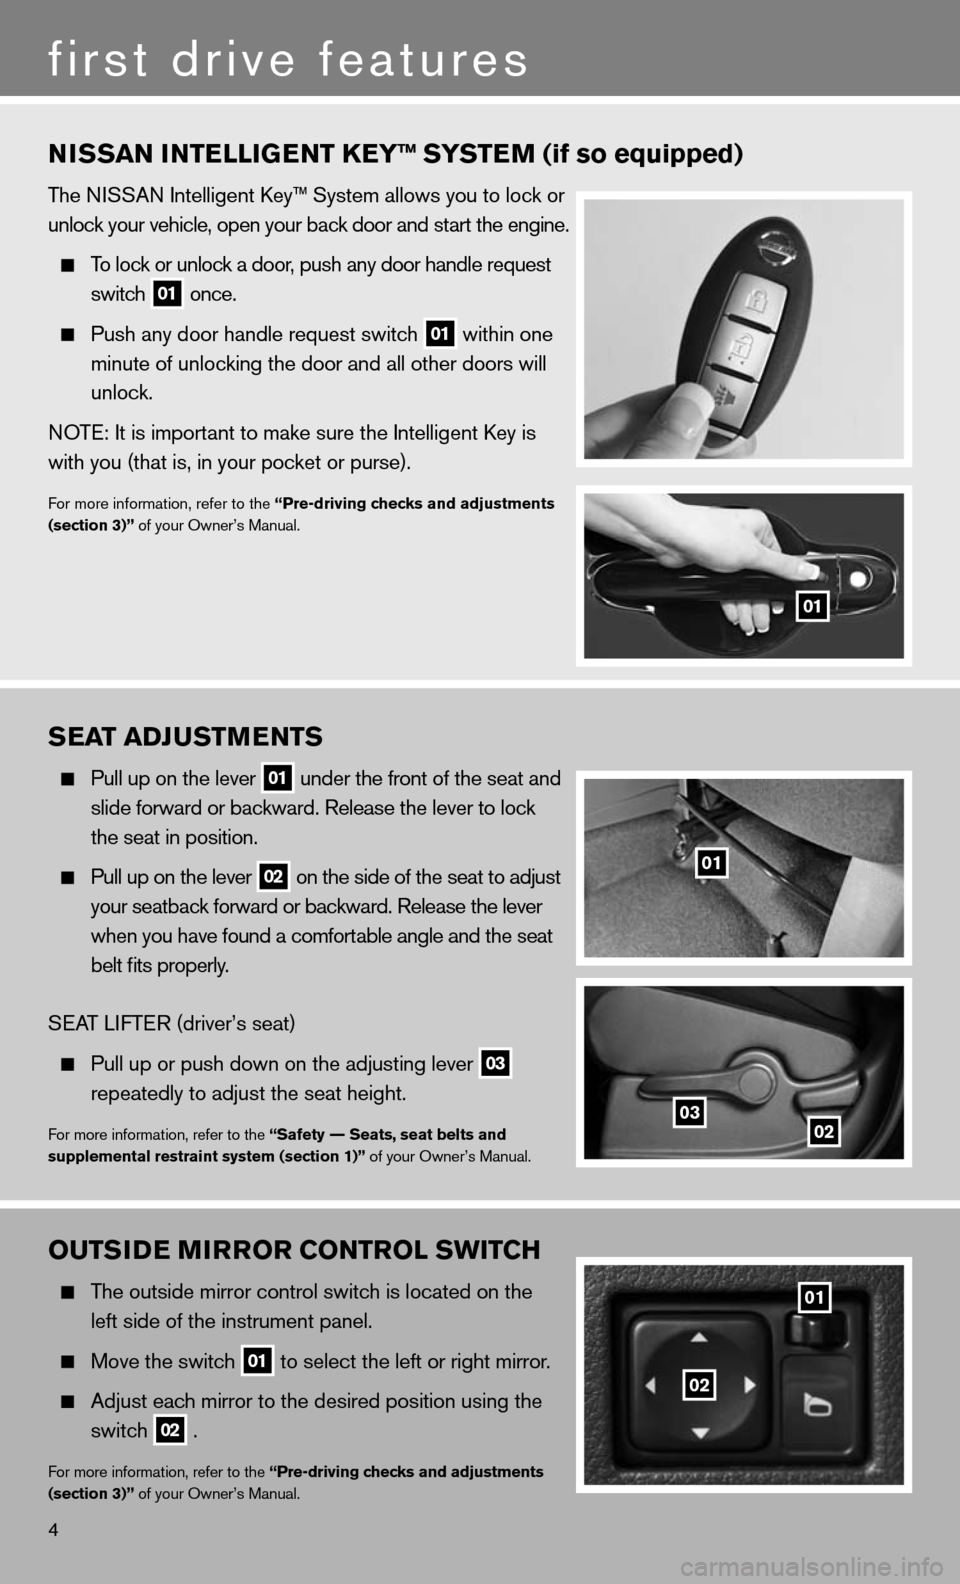 NISSAN CUBE 2011 3.G Quick Reference Guide OuTSIDe MIrrOr CONTr OL SwITCH
  The outside mirror control switch is located on the 
    left side of the instrument panel.  
 
  Move the switch
 01 to select the left or right mirror.
 
 
  Adjust 